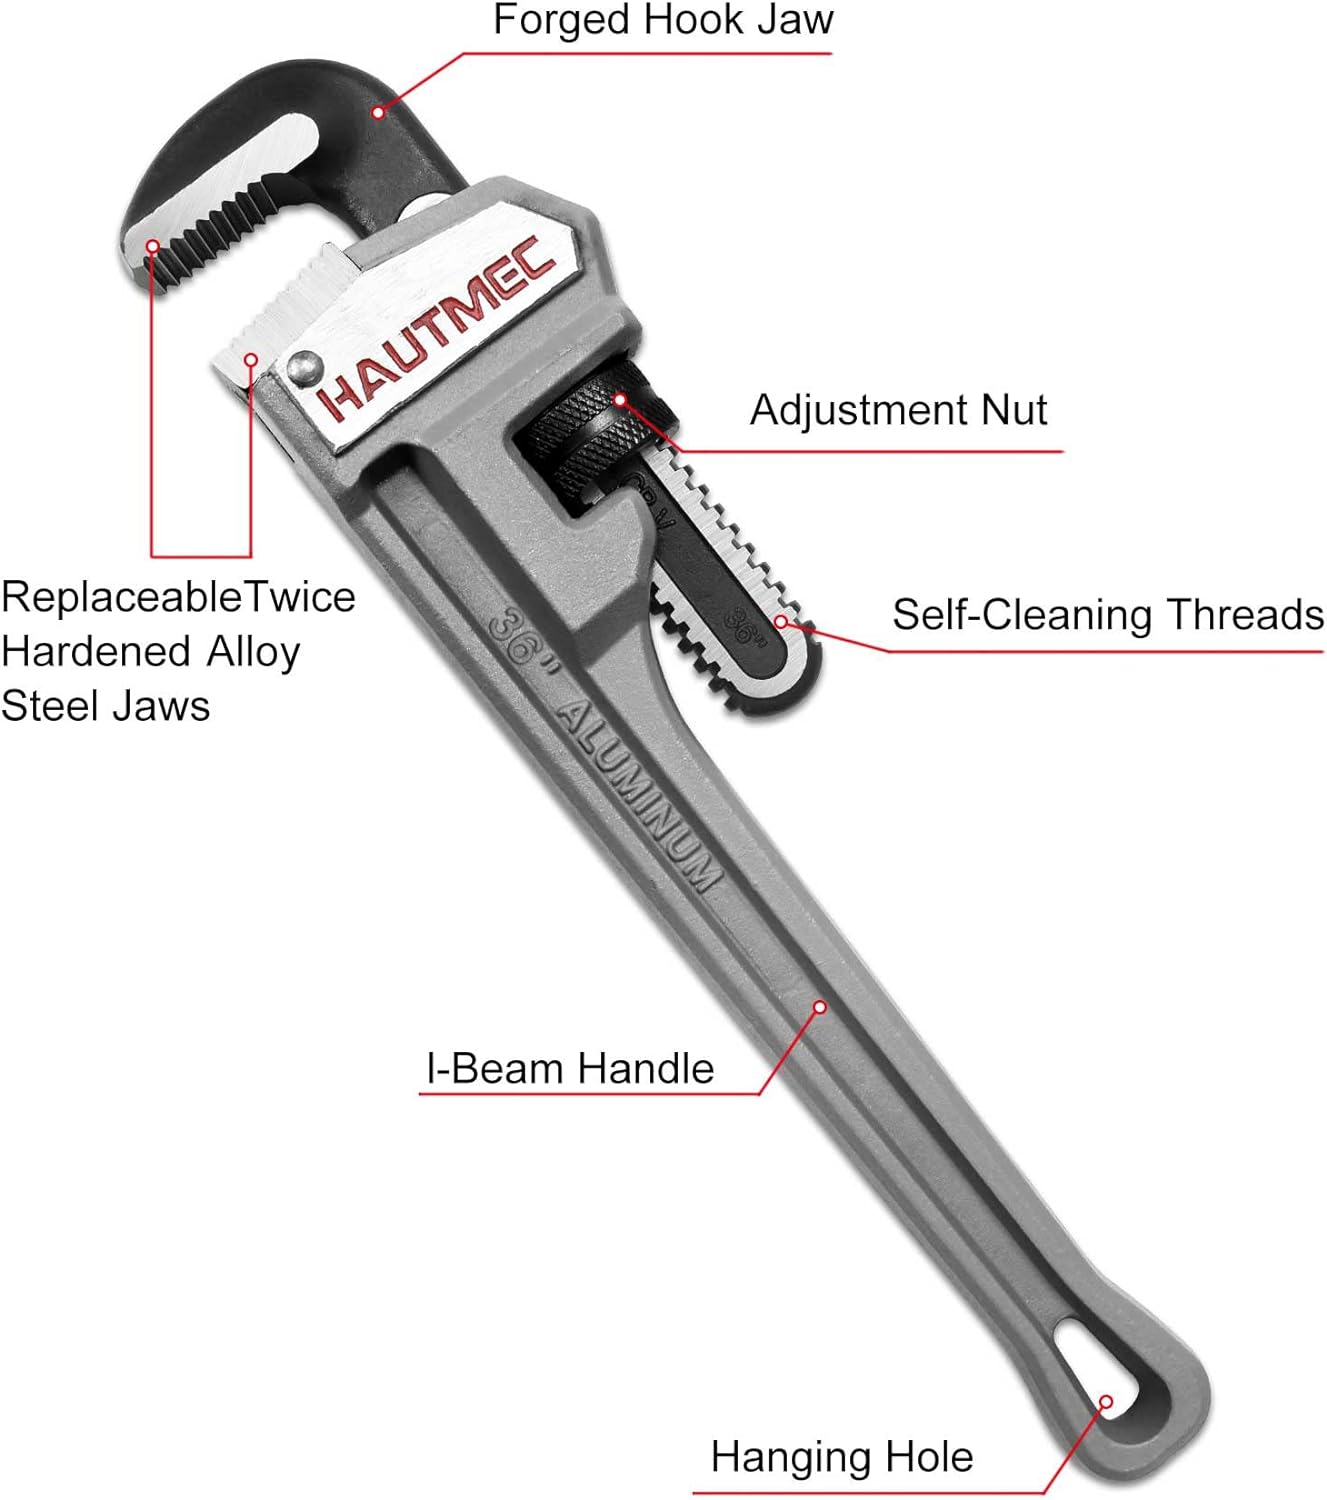 HAUTMEC 36 Inch Aluminum Straight Pipe Wrench, Heavy Duty Adjustable Plumbing Wrench, 4" Jaw Capacity, for Pipes, Tees, Ball Valves and Other Objects HT0188-PW